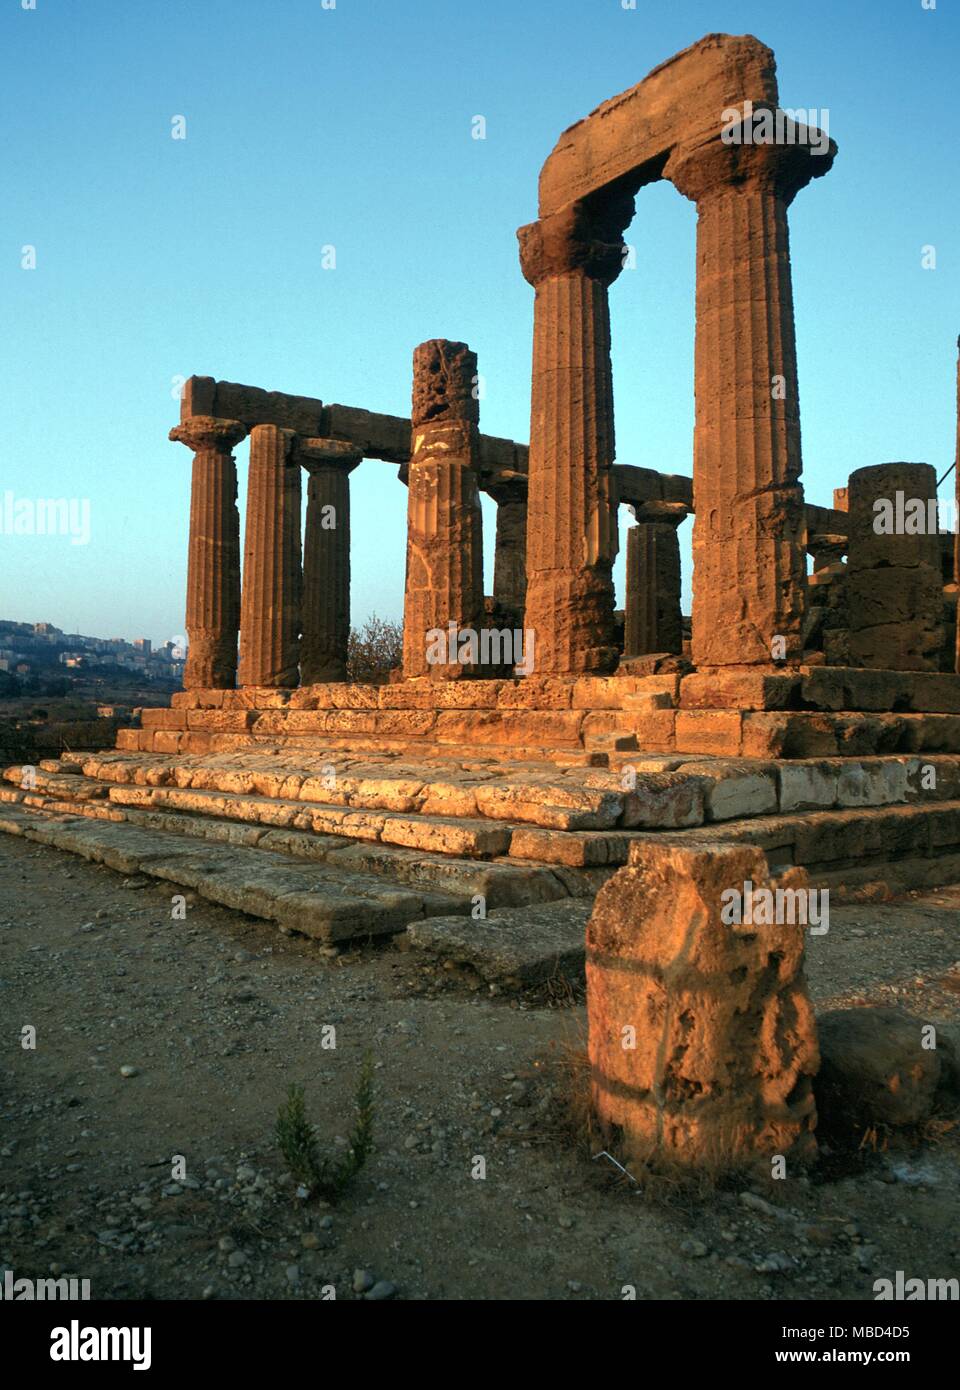 Greek Mythology. Temple of Juno. The Temple of Hera Lacinia, or Juno, at Agrigento, Sicily, built circa 440 BC. To the east end is a long altar, used for sacrifice of animals. Stock Photo